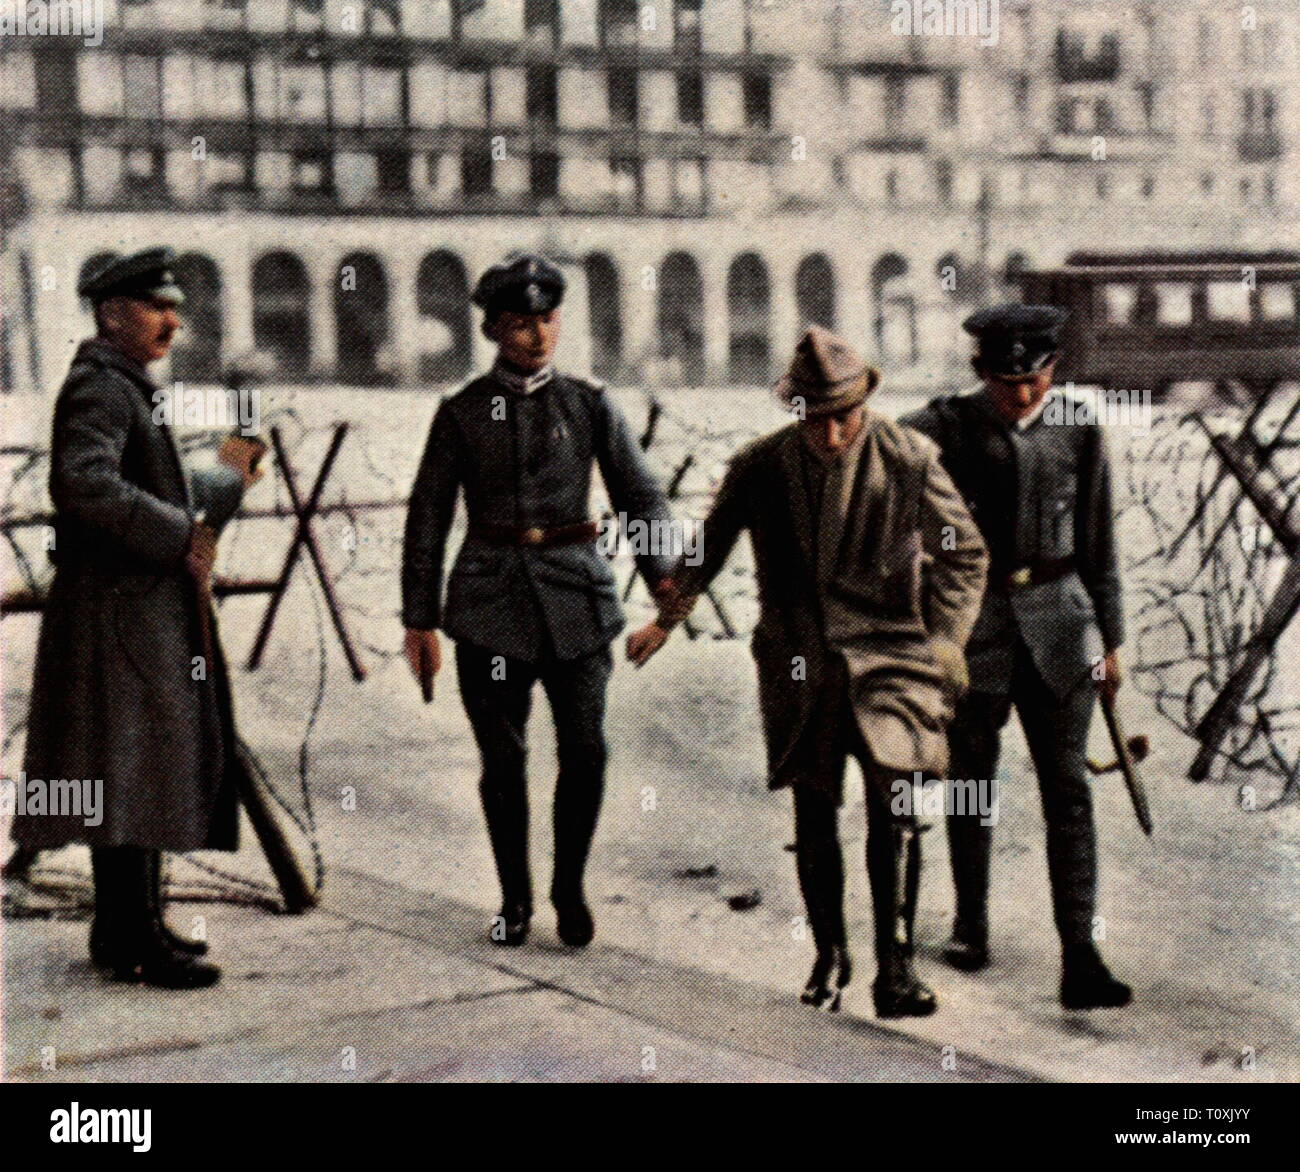 Riots in Hamburg, February 1921, arresting a ringleader, coloured photograph, cigarette card, series 'Die Nachkriegszeit', 1935, police, policemen, policeman, detain, detaining, Germany, German Reich, Third Reich, Weimar Republic, 1920s, 20th century, riot, riots, under arrest, ringleader, gang leader, ringleaders, gang leaders, coloured, colored, post war period, post-war period, post-war years, post-war era, historic, historical, Additional-Rights-Clearance-Info-Not-Available Stock Photo